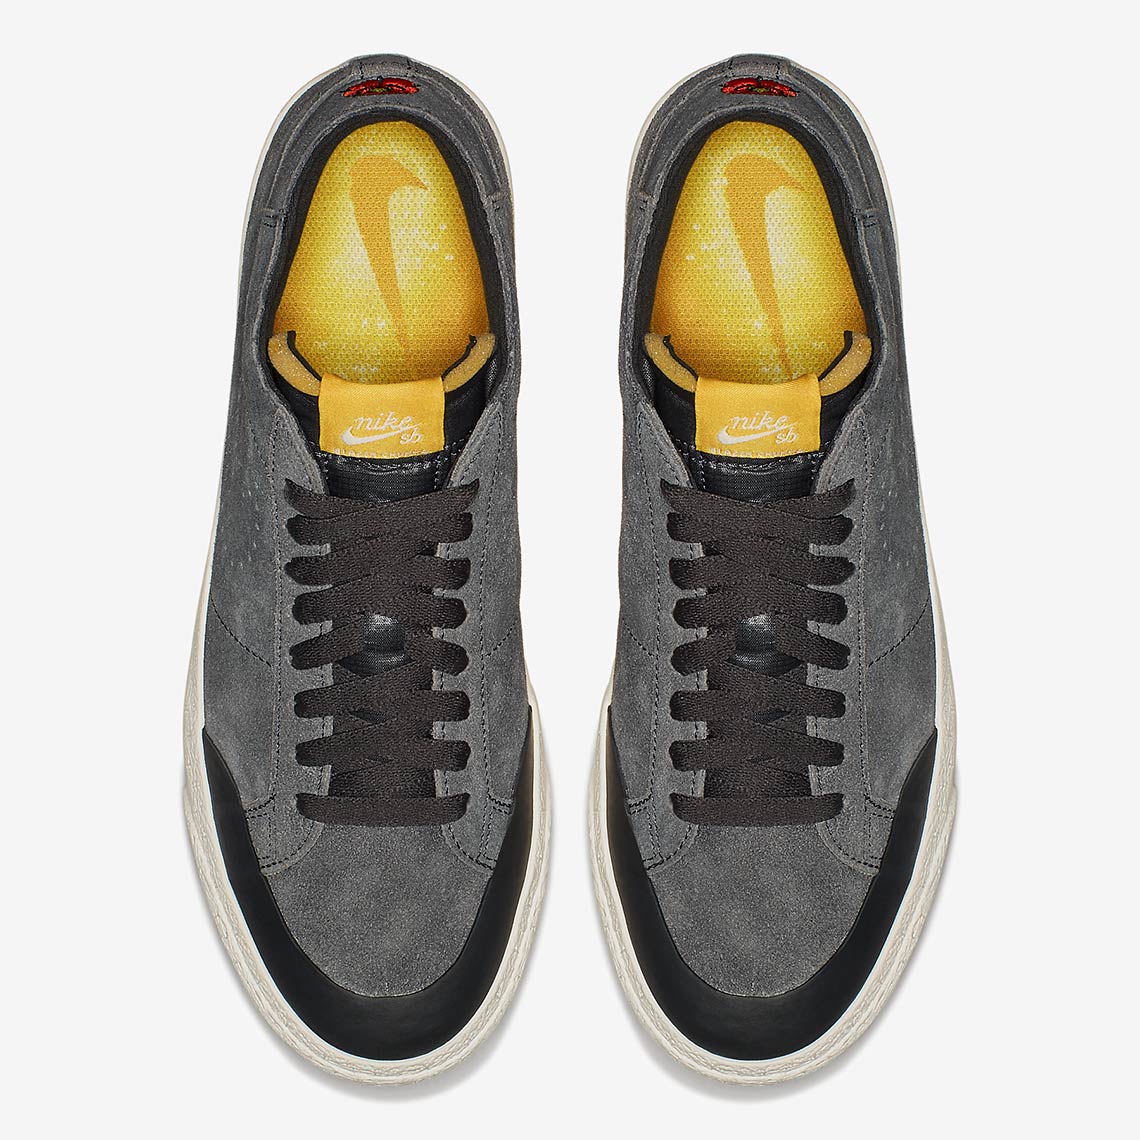 Lance Mountain Nike Blazer Shoes Available Now | SneakerNews.com